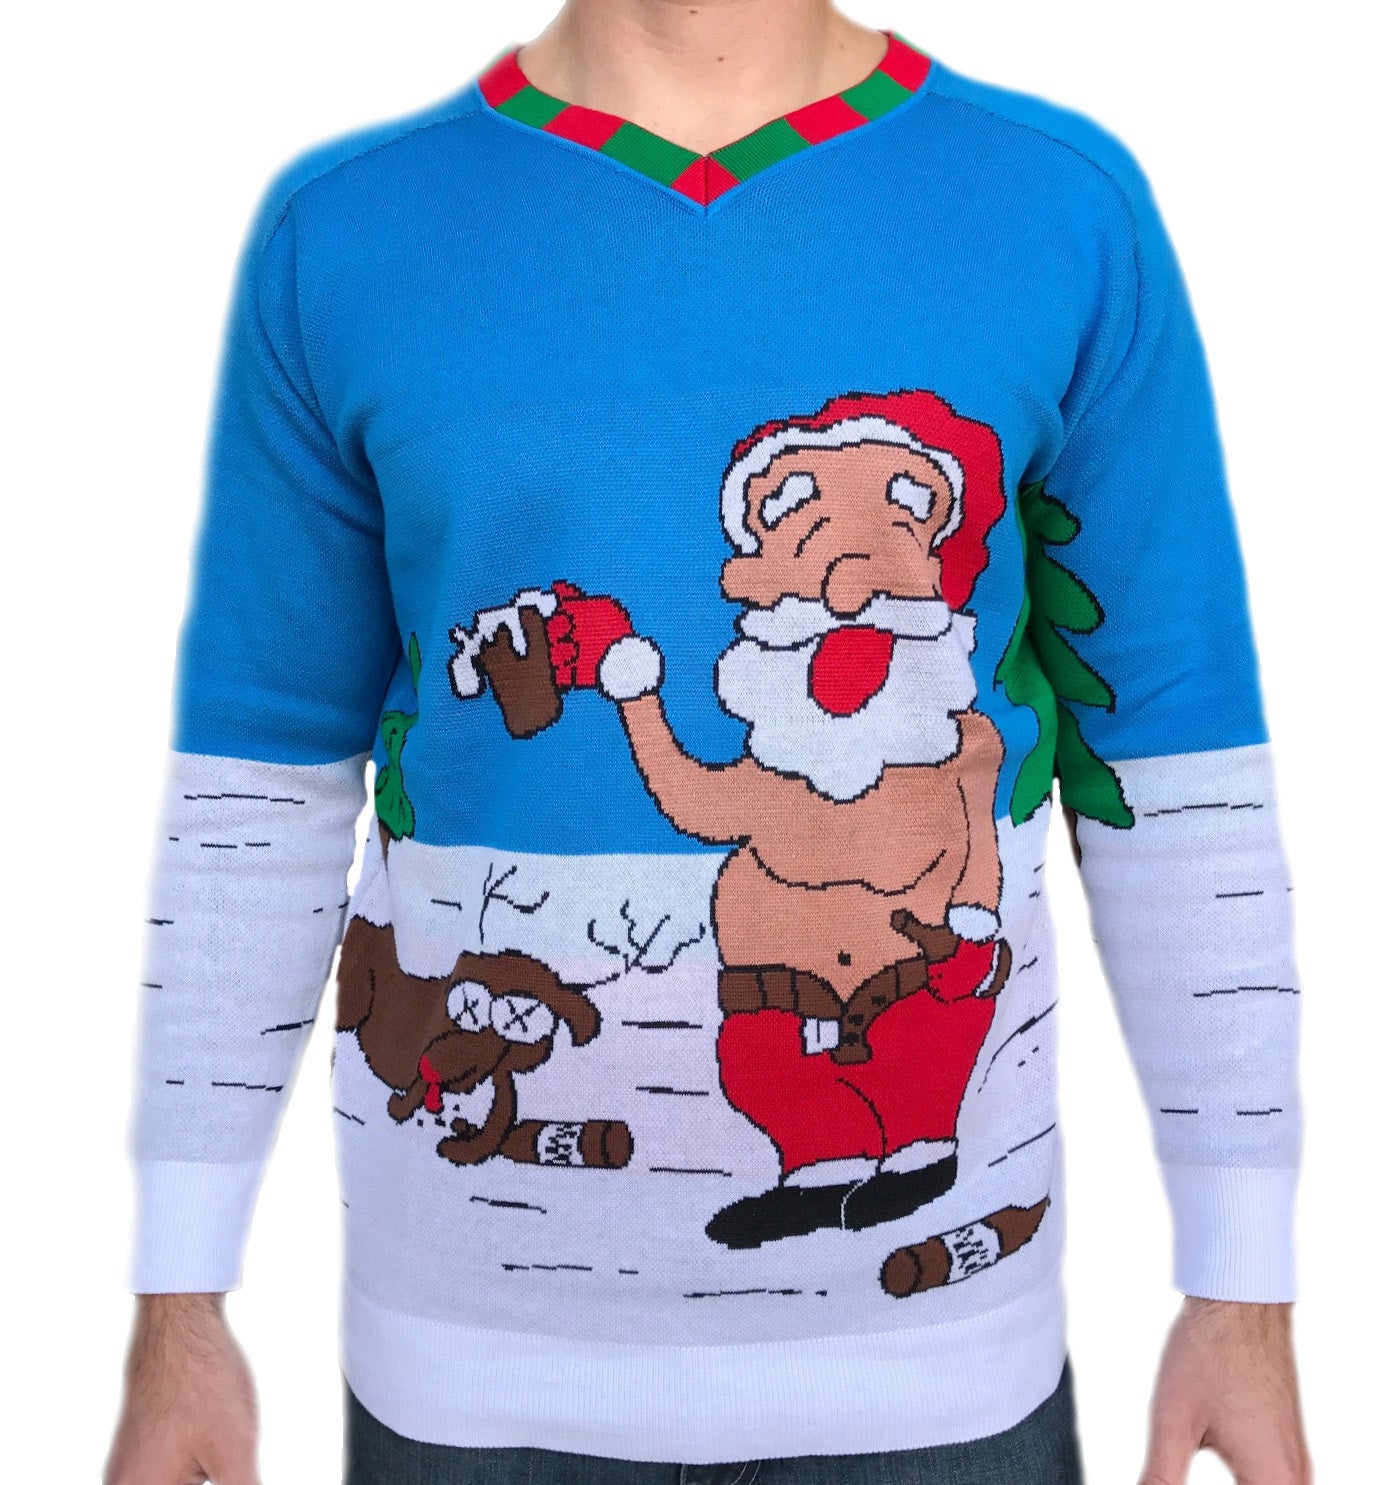 SALE ~ Unisex Adult Funny Drunk Santa and Reindeer Ugly Christmas Sweater Knit Shirt